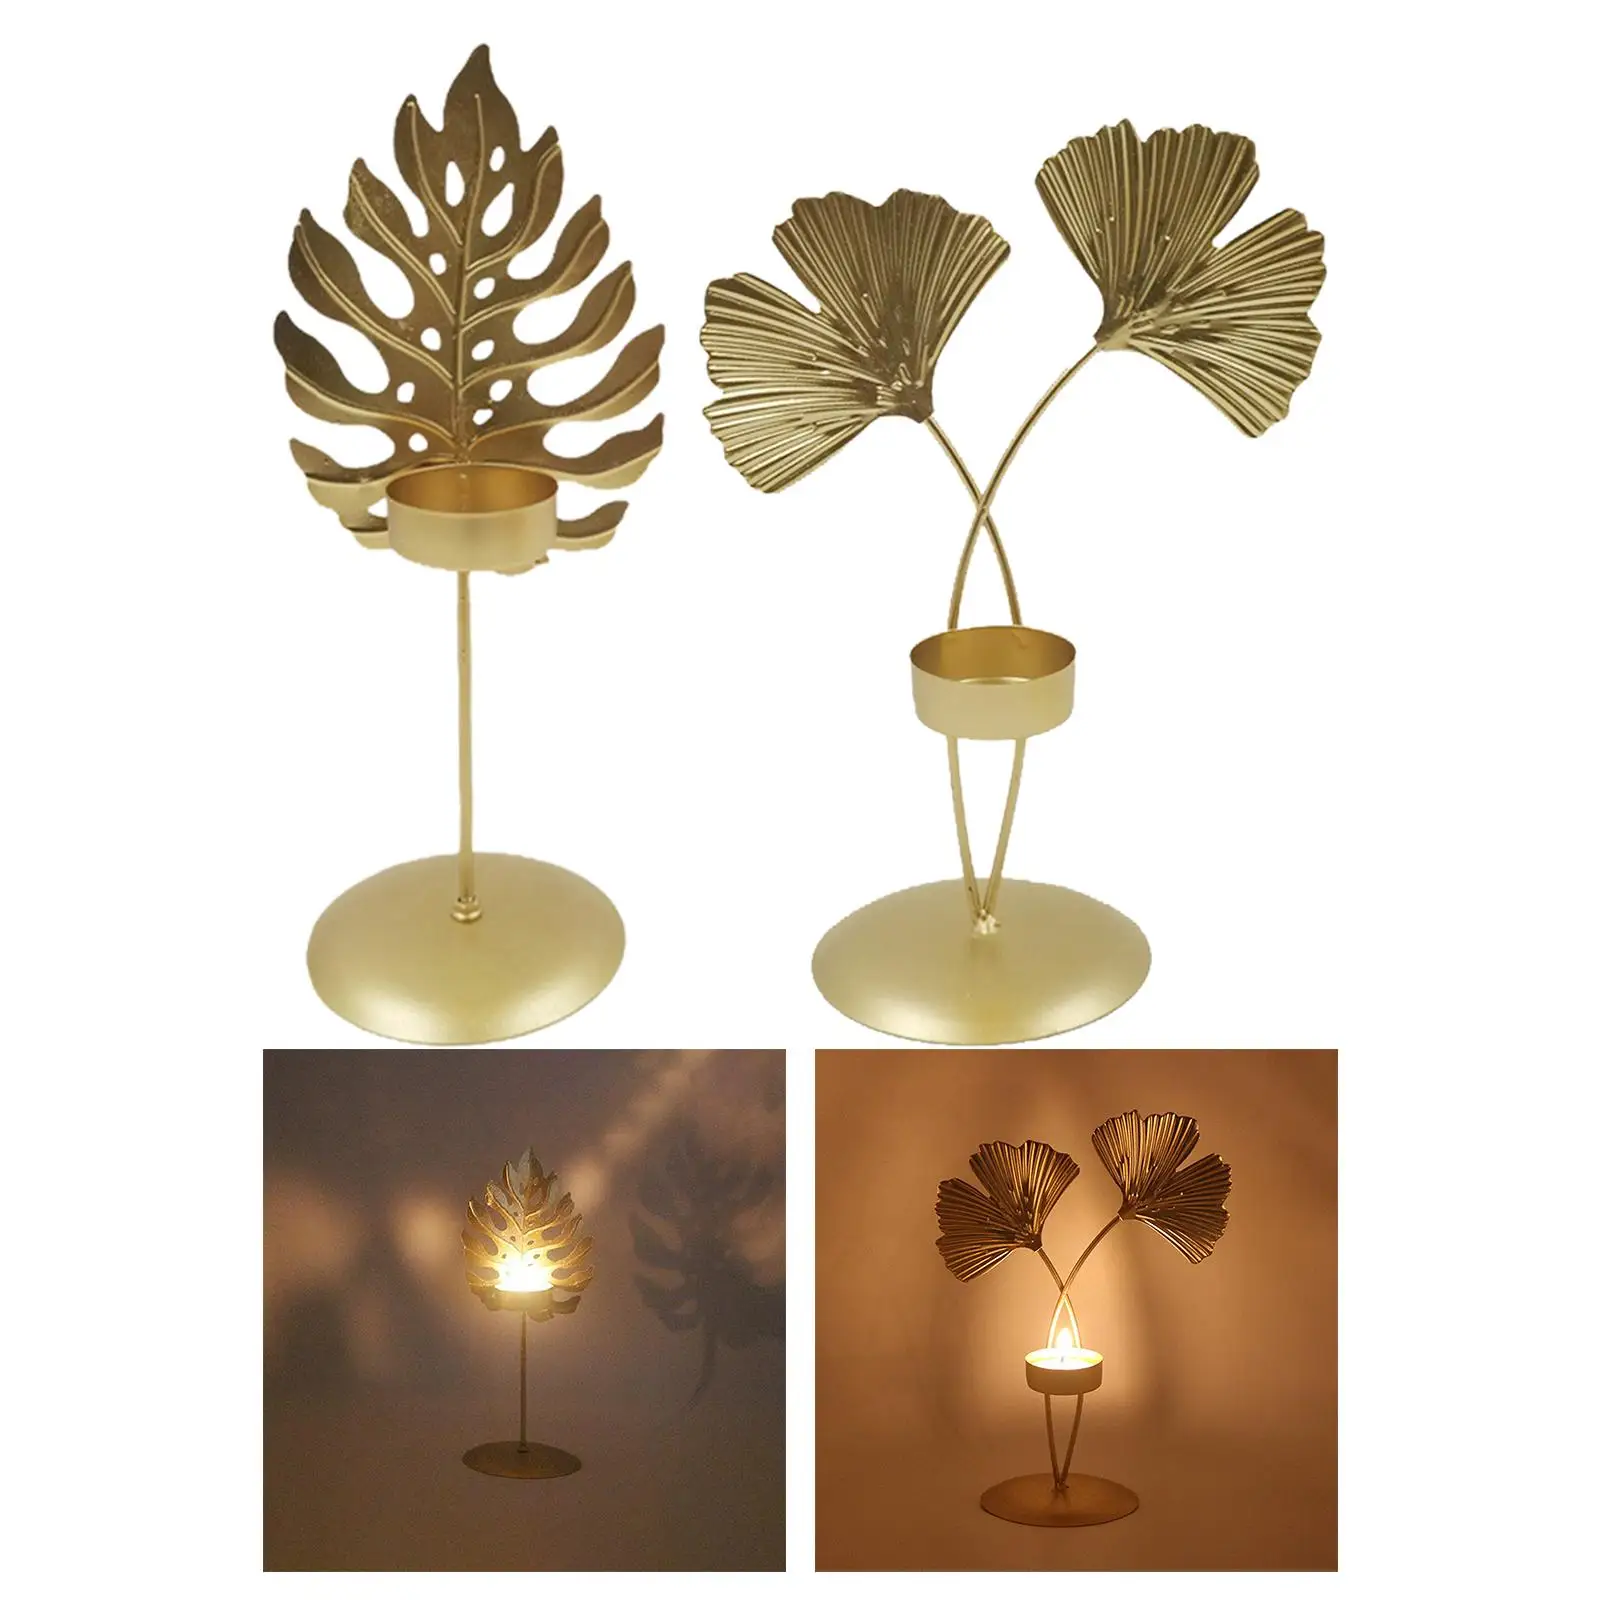 Golden Leaf Candle Holder Ornament Stick Holder Candlestick Crafts Centerpiece Gift for Event Wedding Table Parties Dining Table